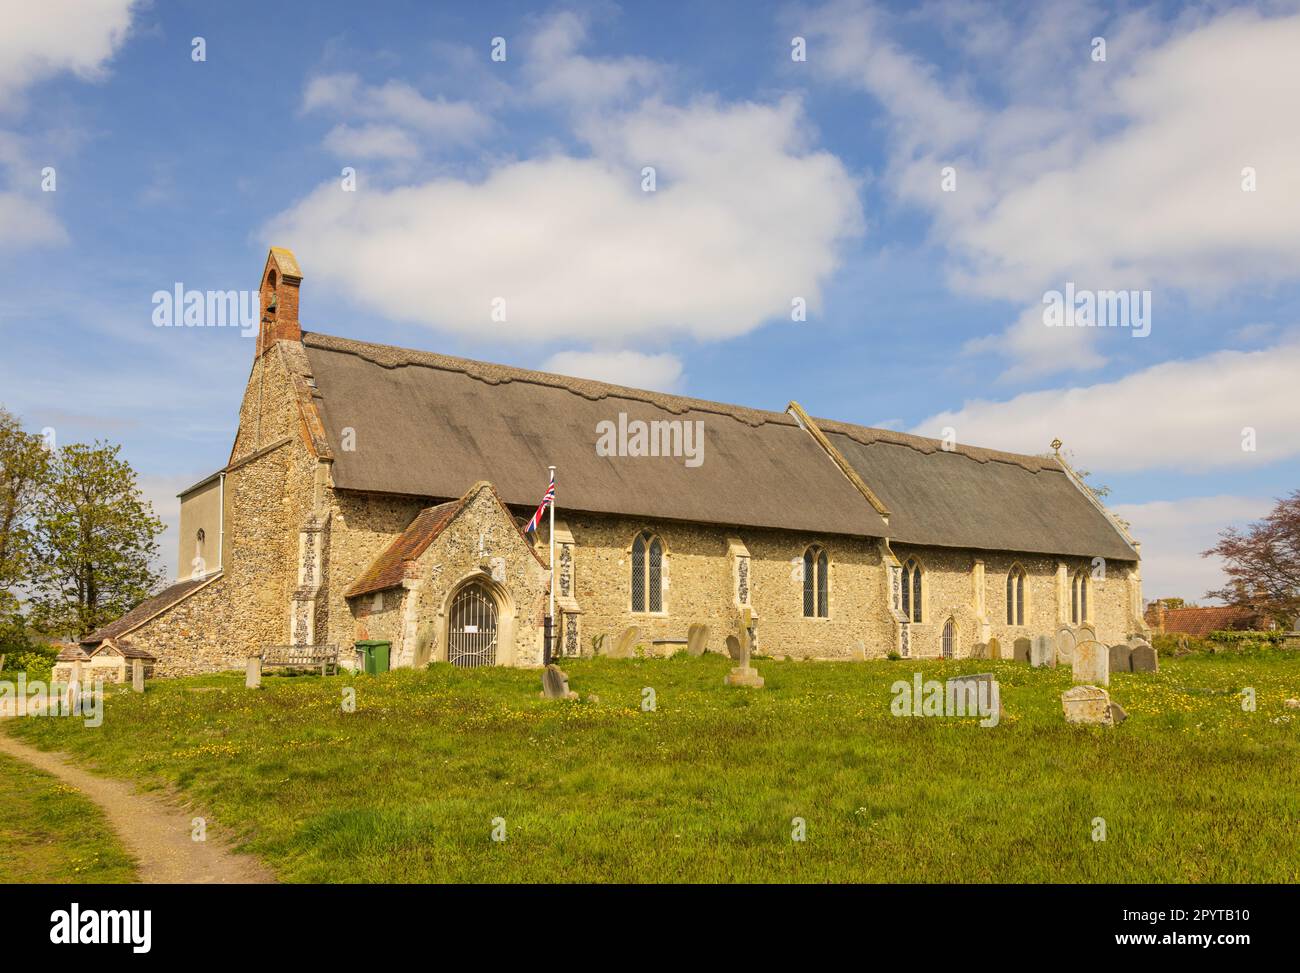 Exterior of St Peter's Church with a thatched roof. Westleton, Suffolk. UK Stock Photo